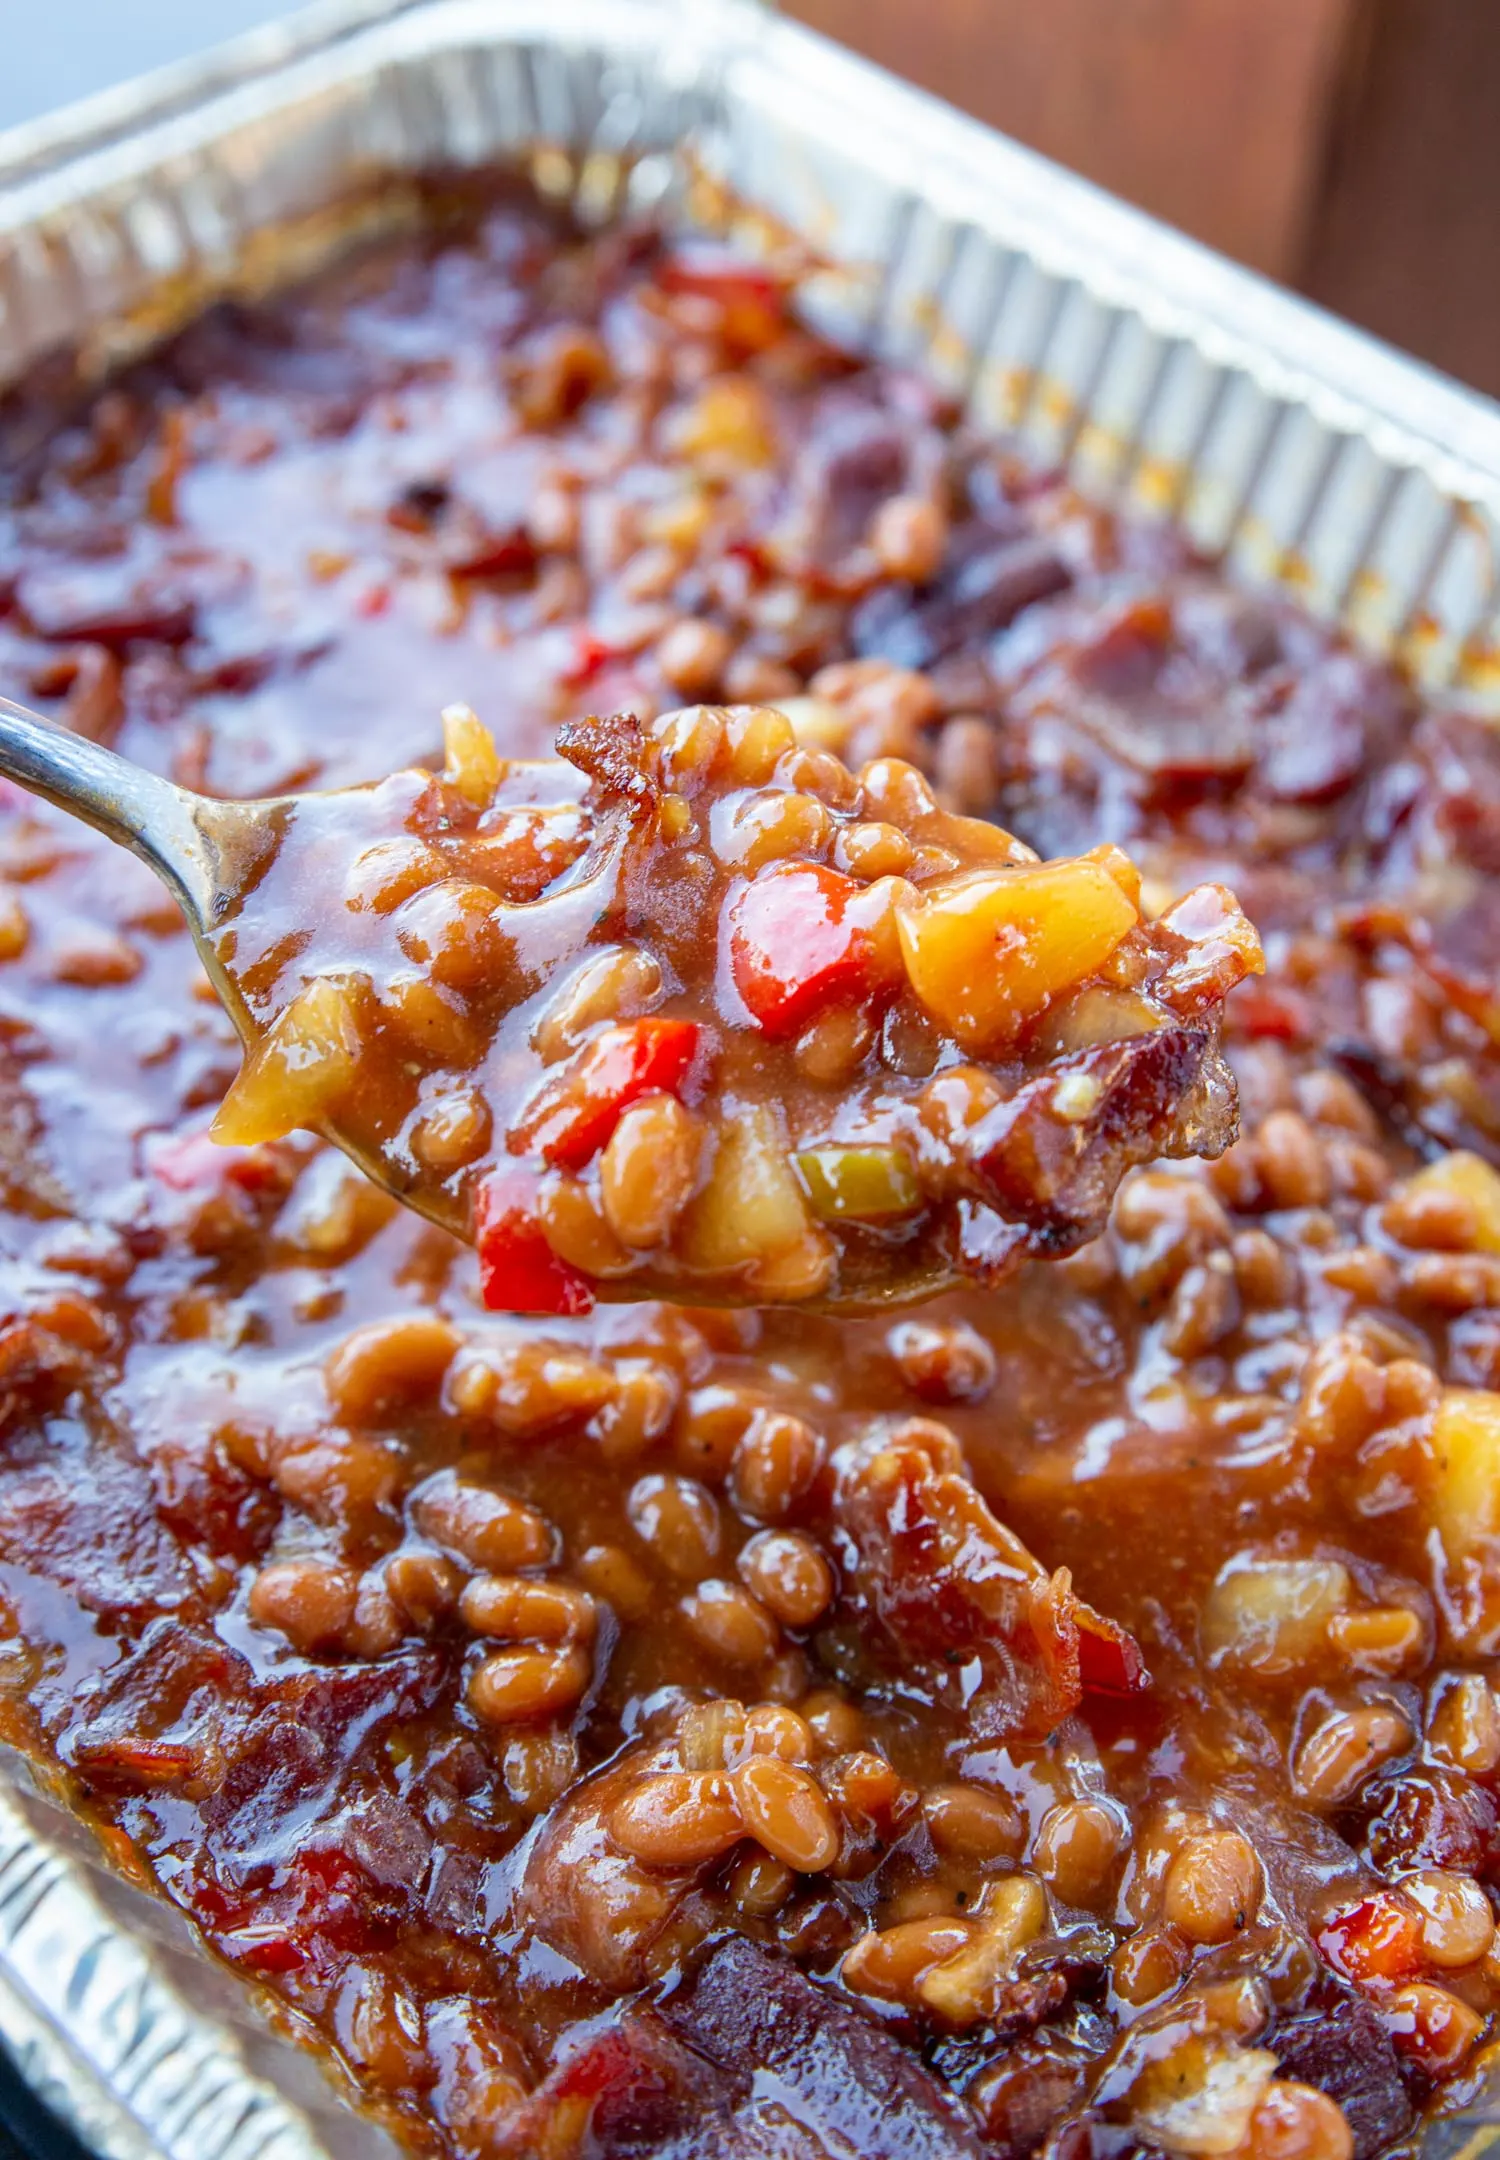 Juicy baked beans served up from a spoon out of an aluminum pan